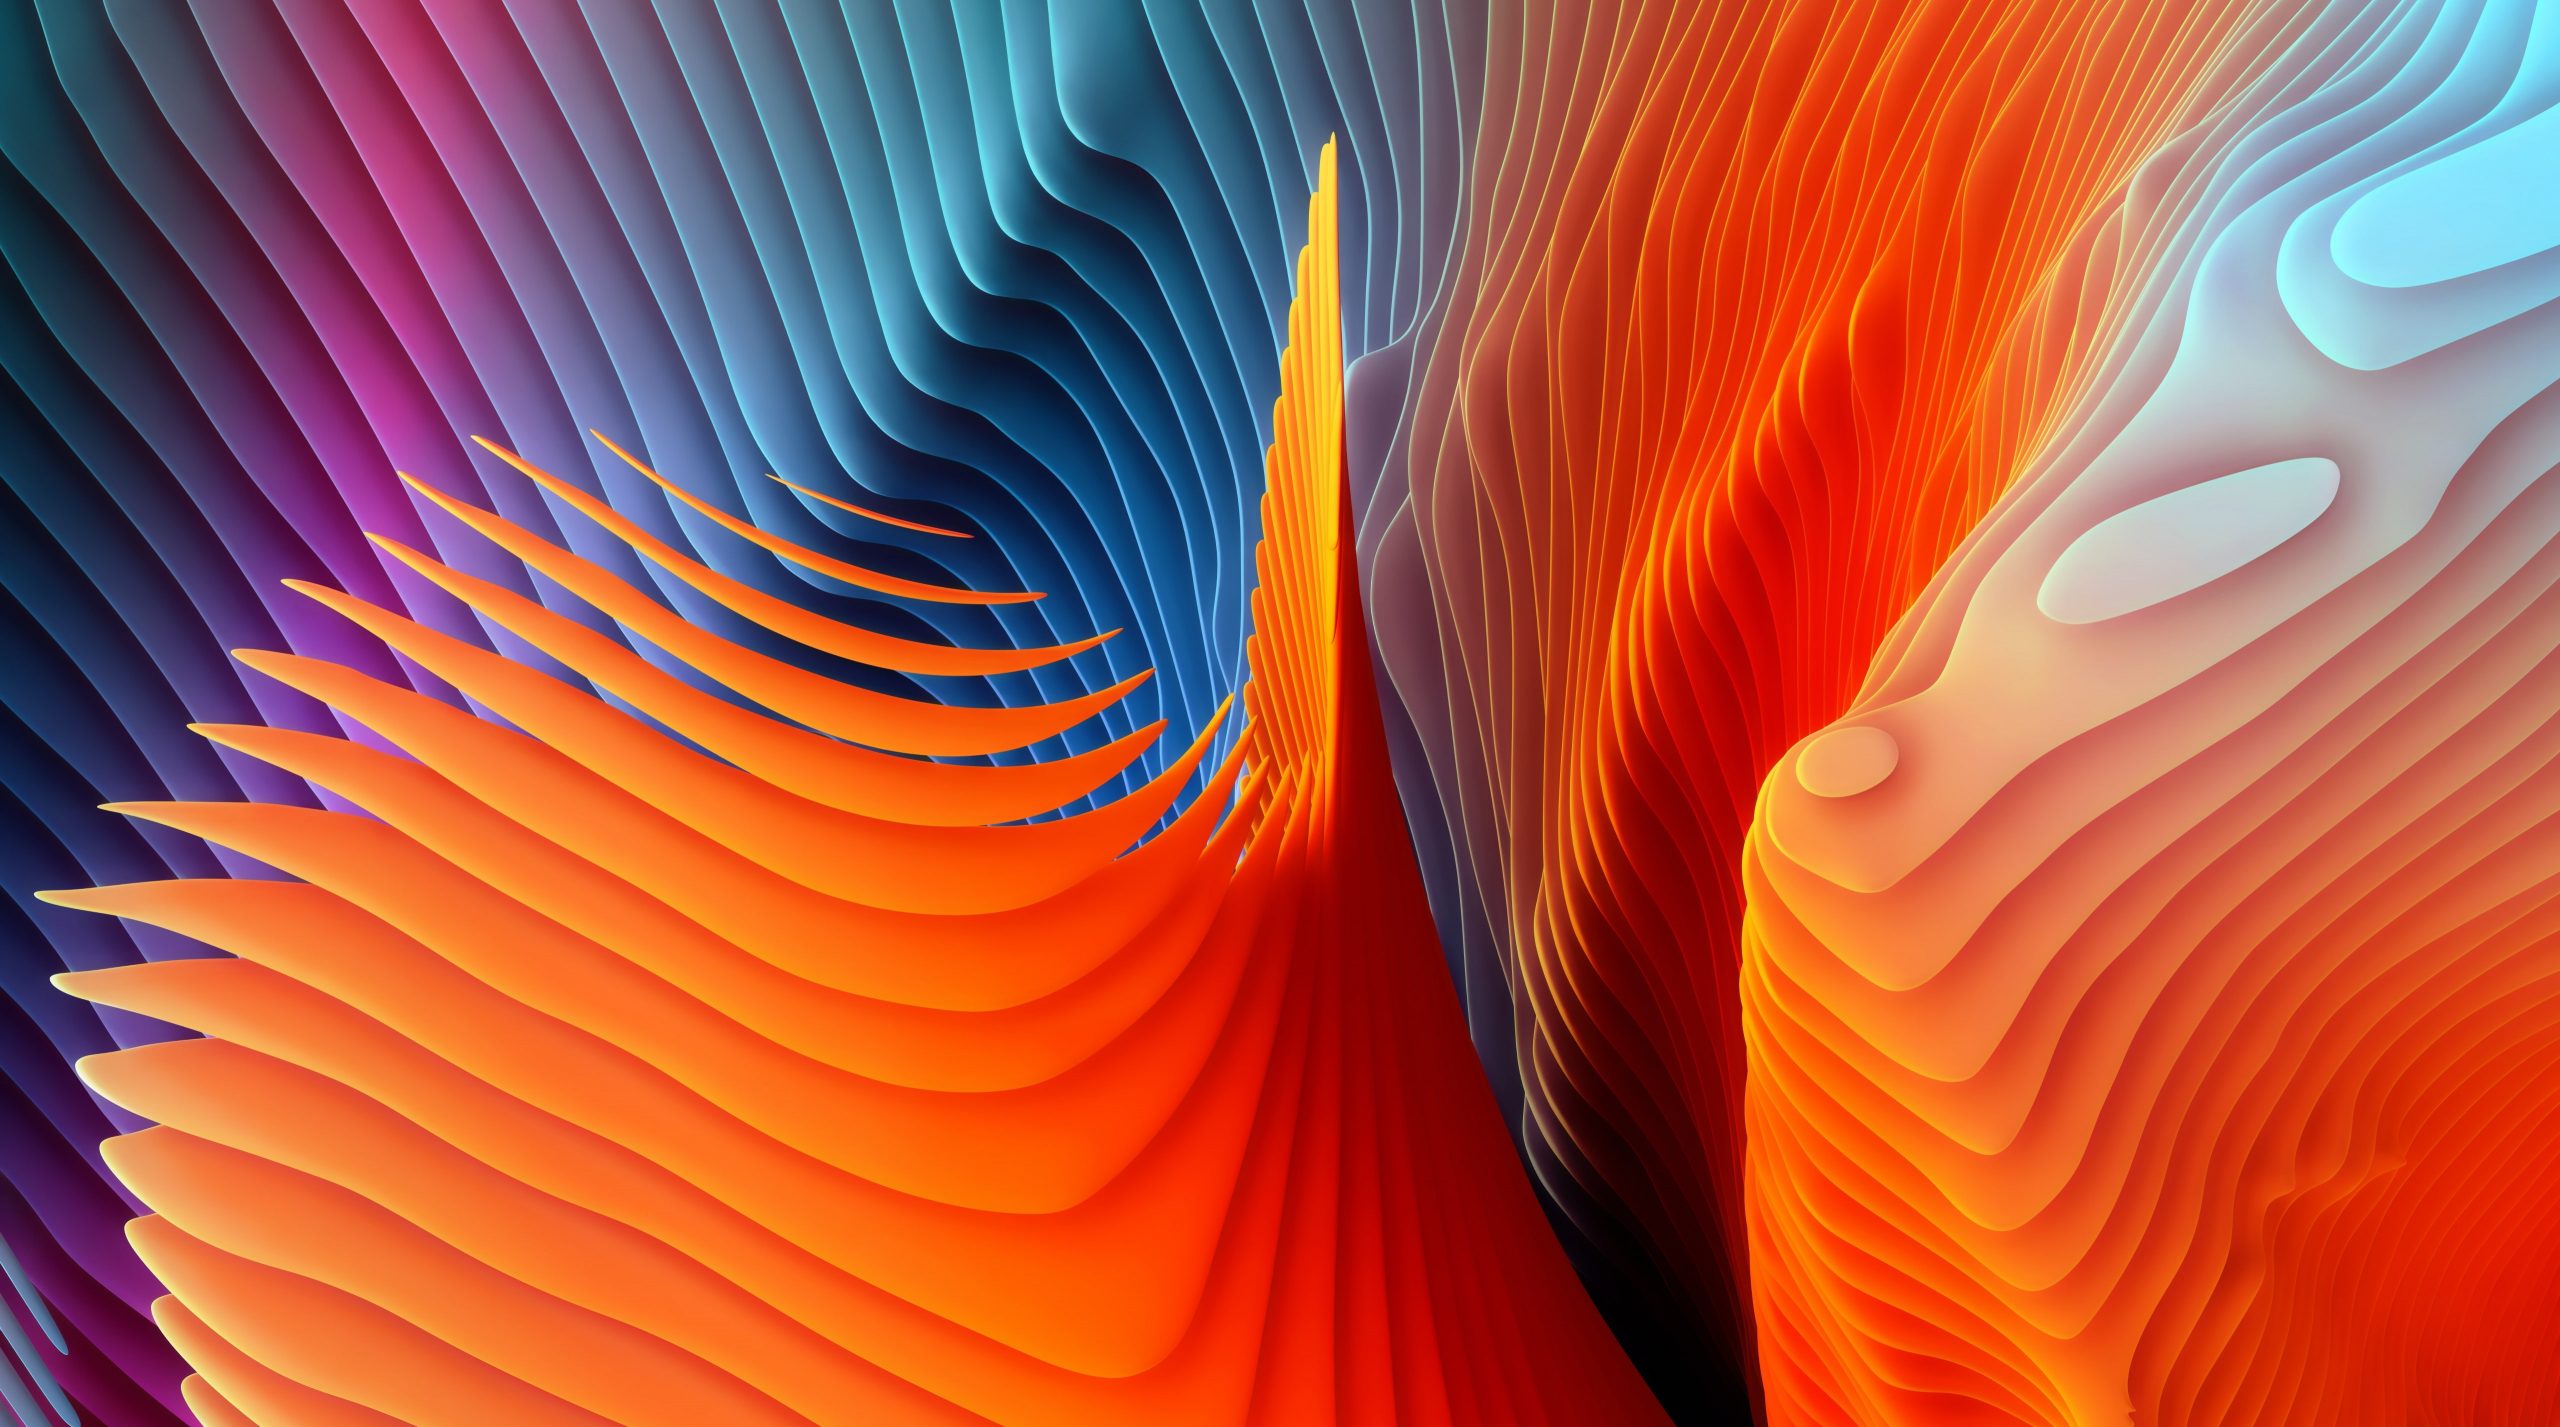 Wallpaper Apple Abstract, Orange, White, And Blue Abstract